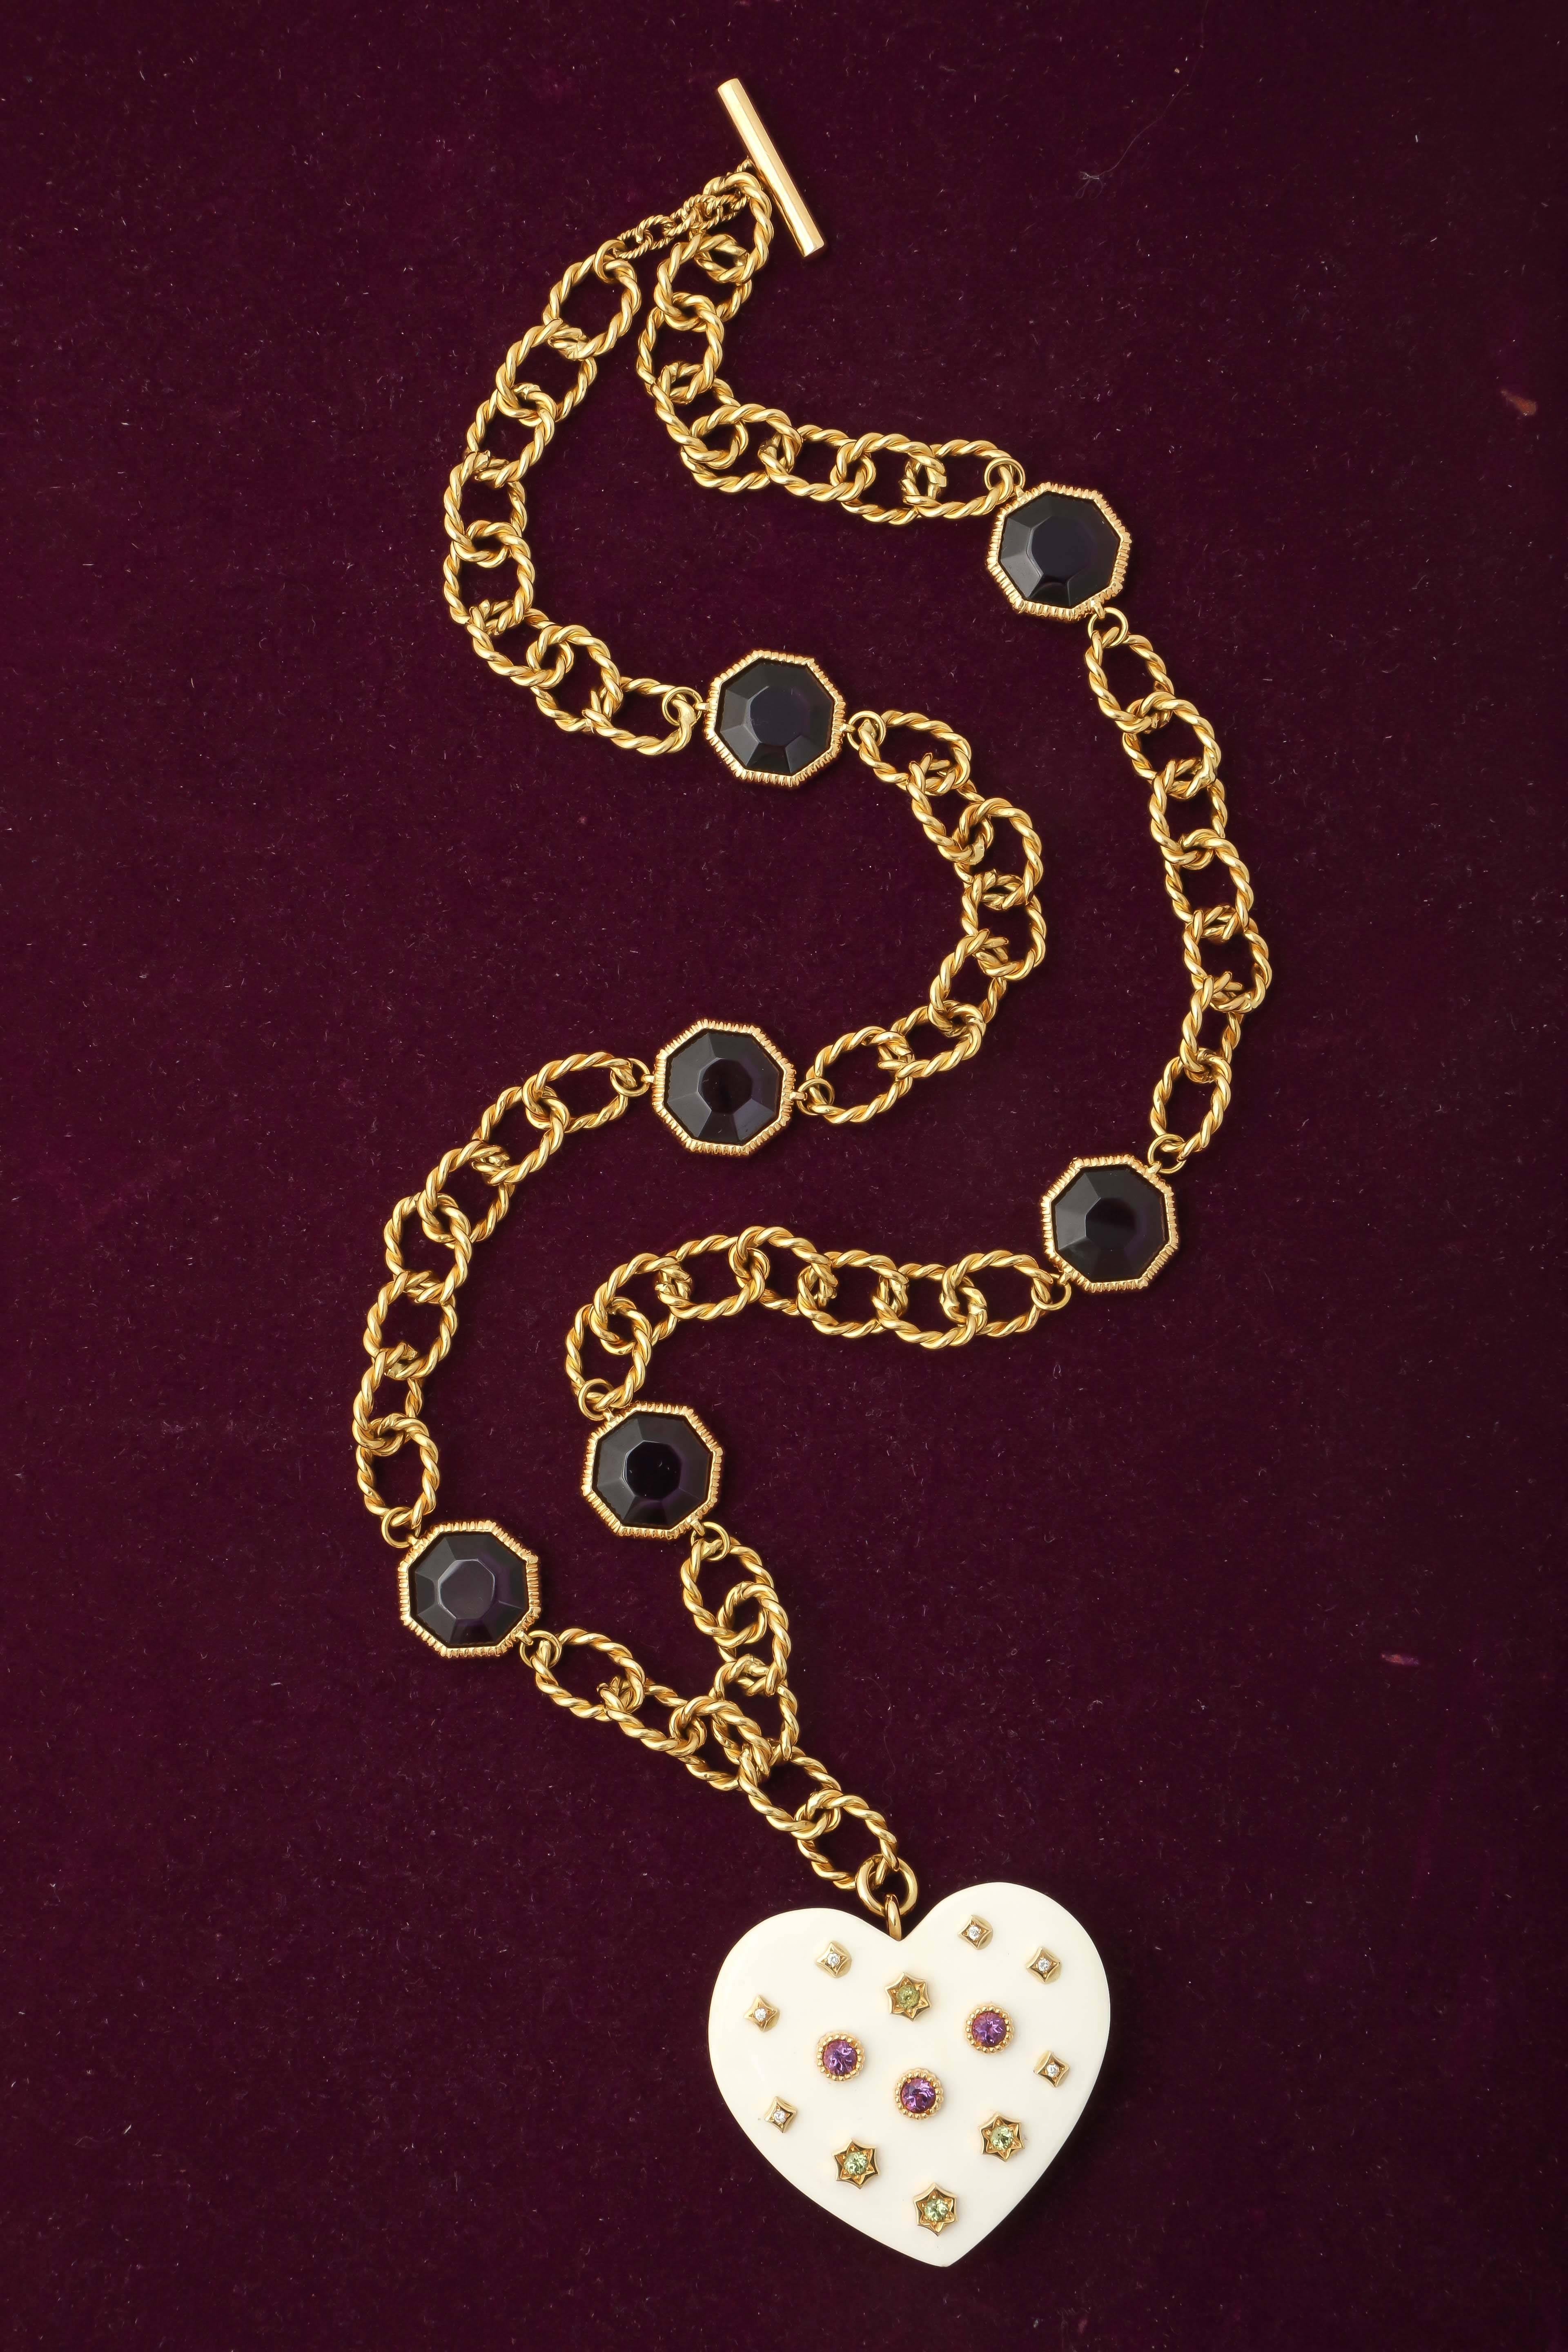 18kt yellow gold link Chain/Necklace Designed With A Large Heart Hanging From The Bottom Measuring 1.25 inches in length and 1.75 inches wide. Heart Made Of White Ceramic And Embellished With Faceted Amethyst,Peridot & Diamond Stones. Chain Also